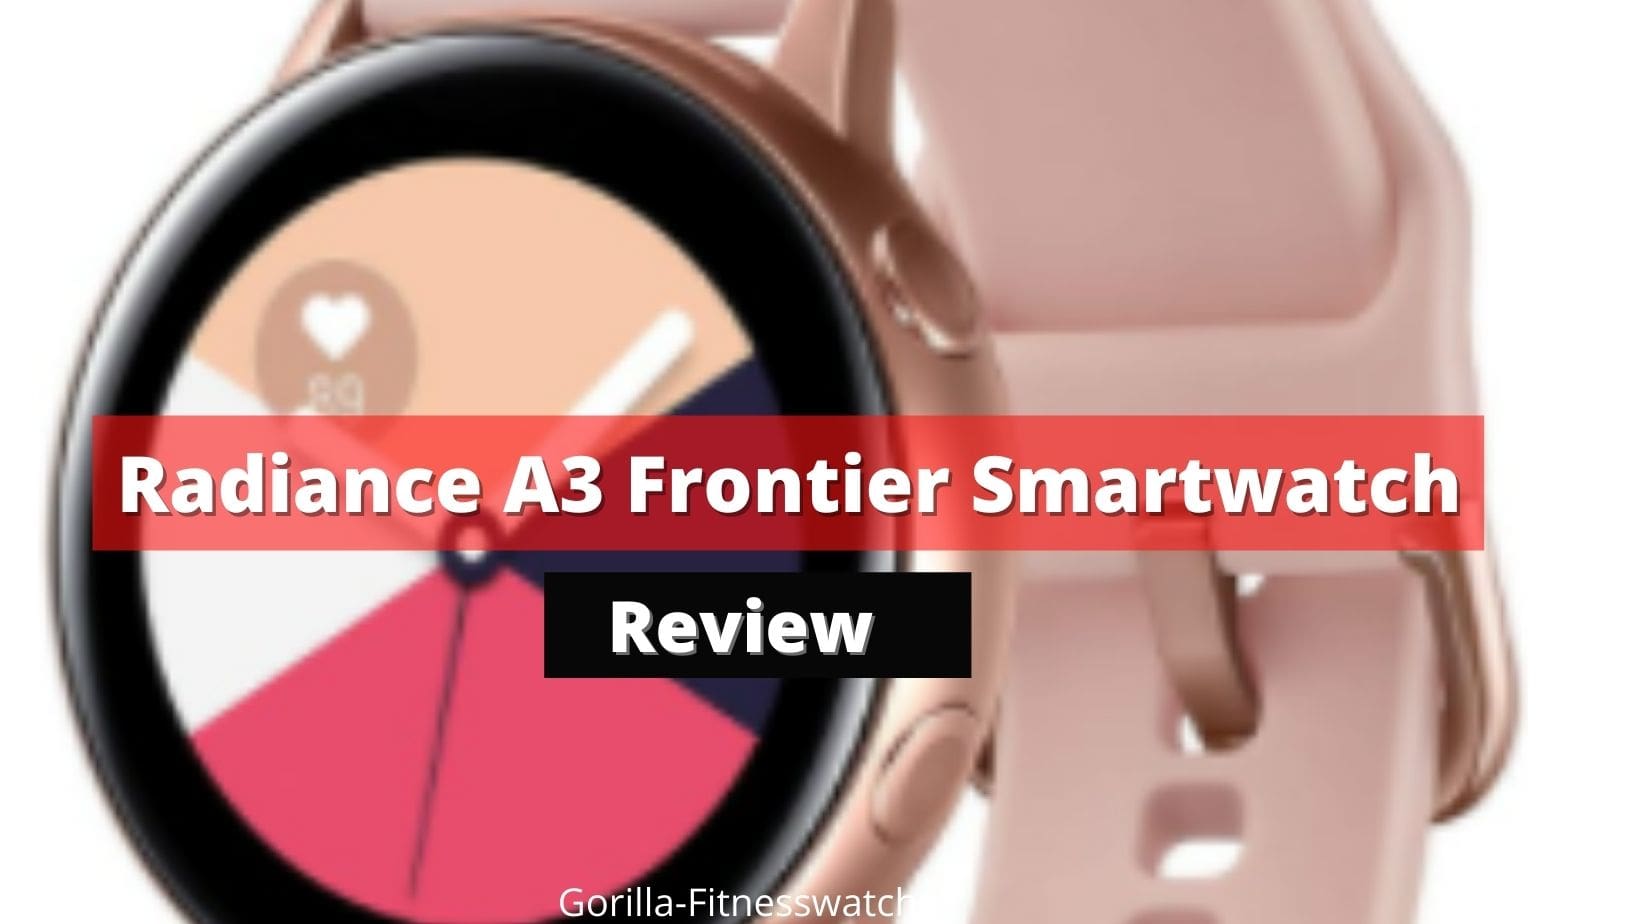 Radiance A3 Frontier Smartwatch